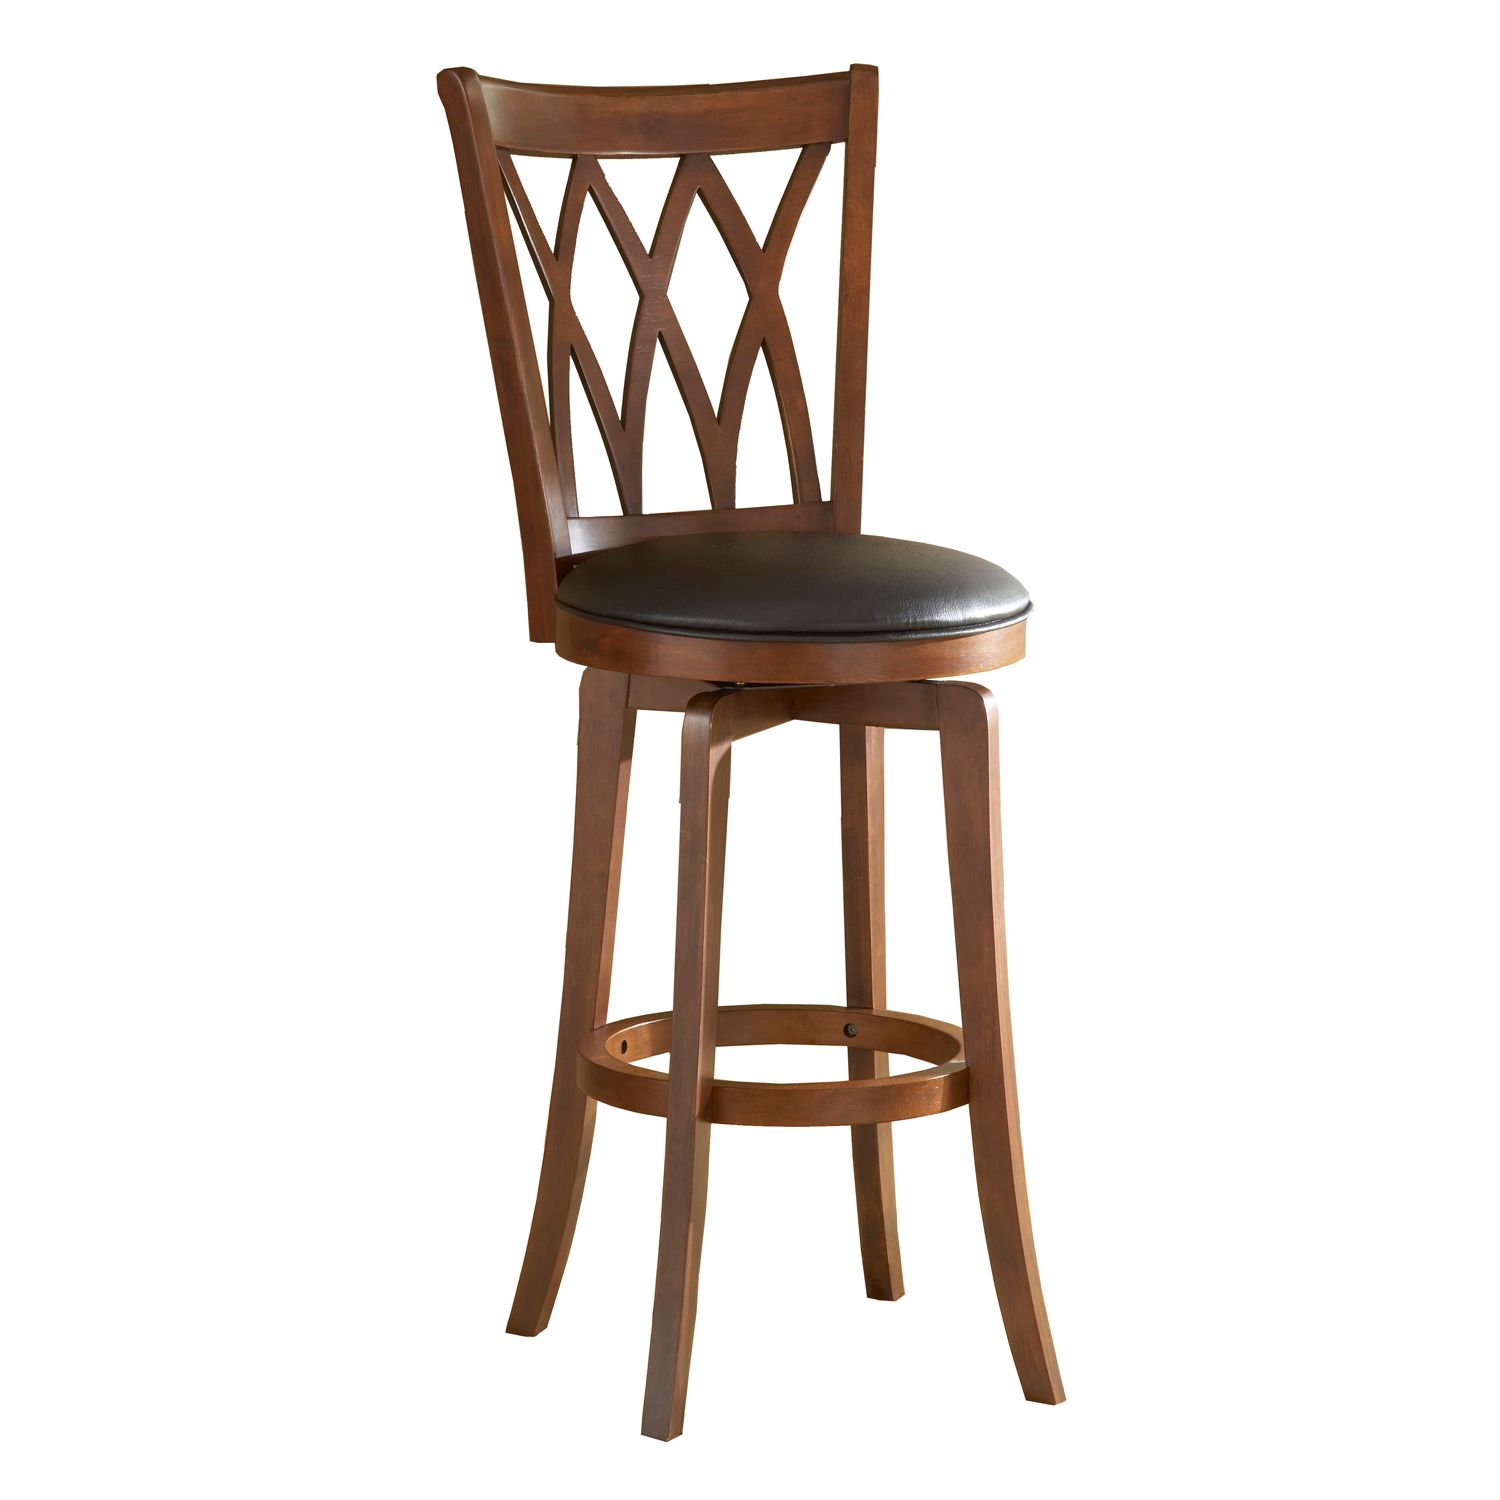 Image for Hillsdale Furniture Mansfield Swivel Bar Stool at Kohl's.